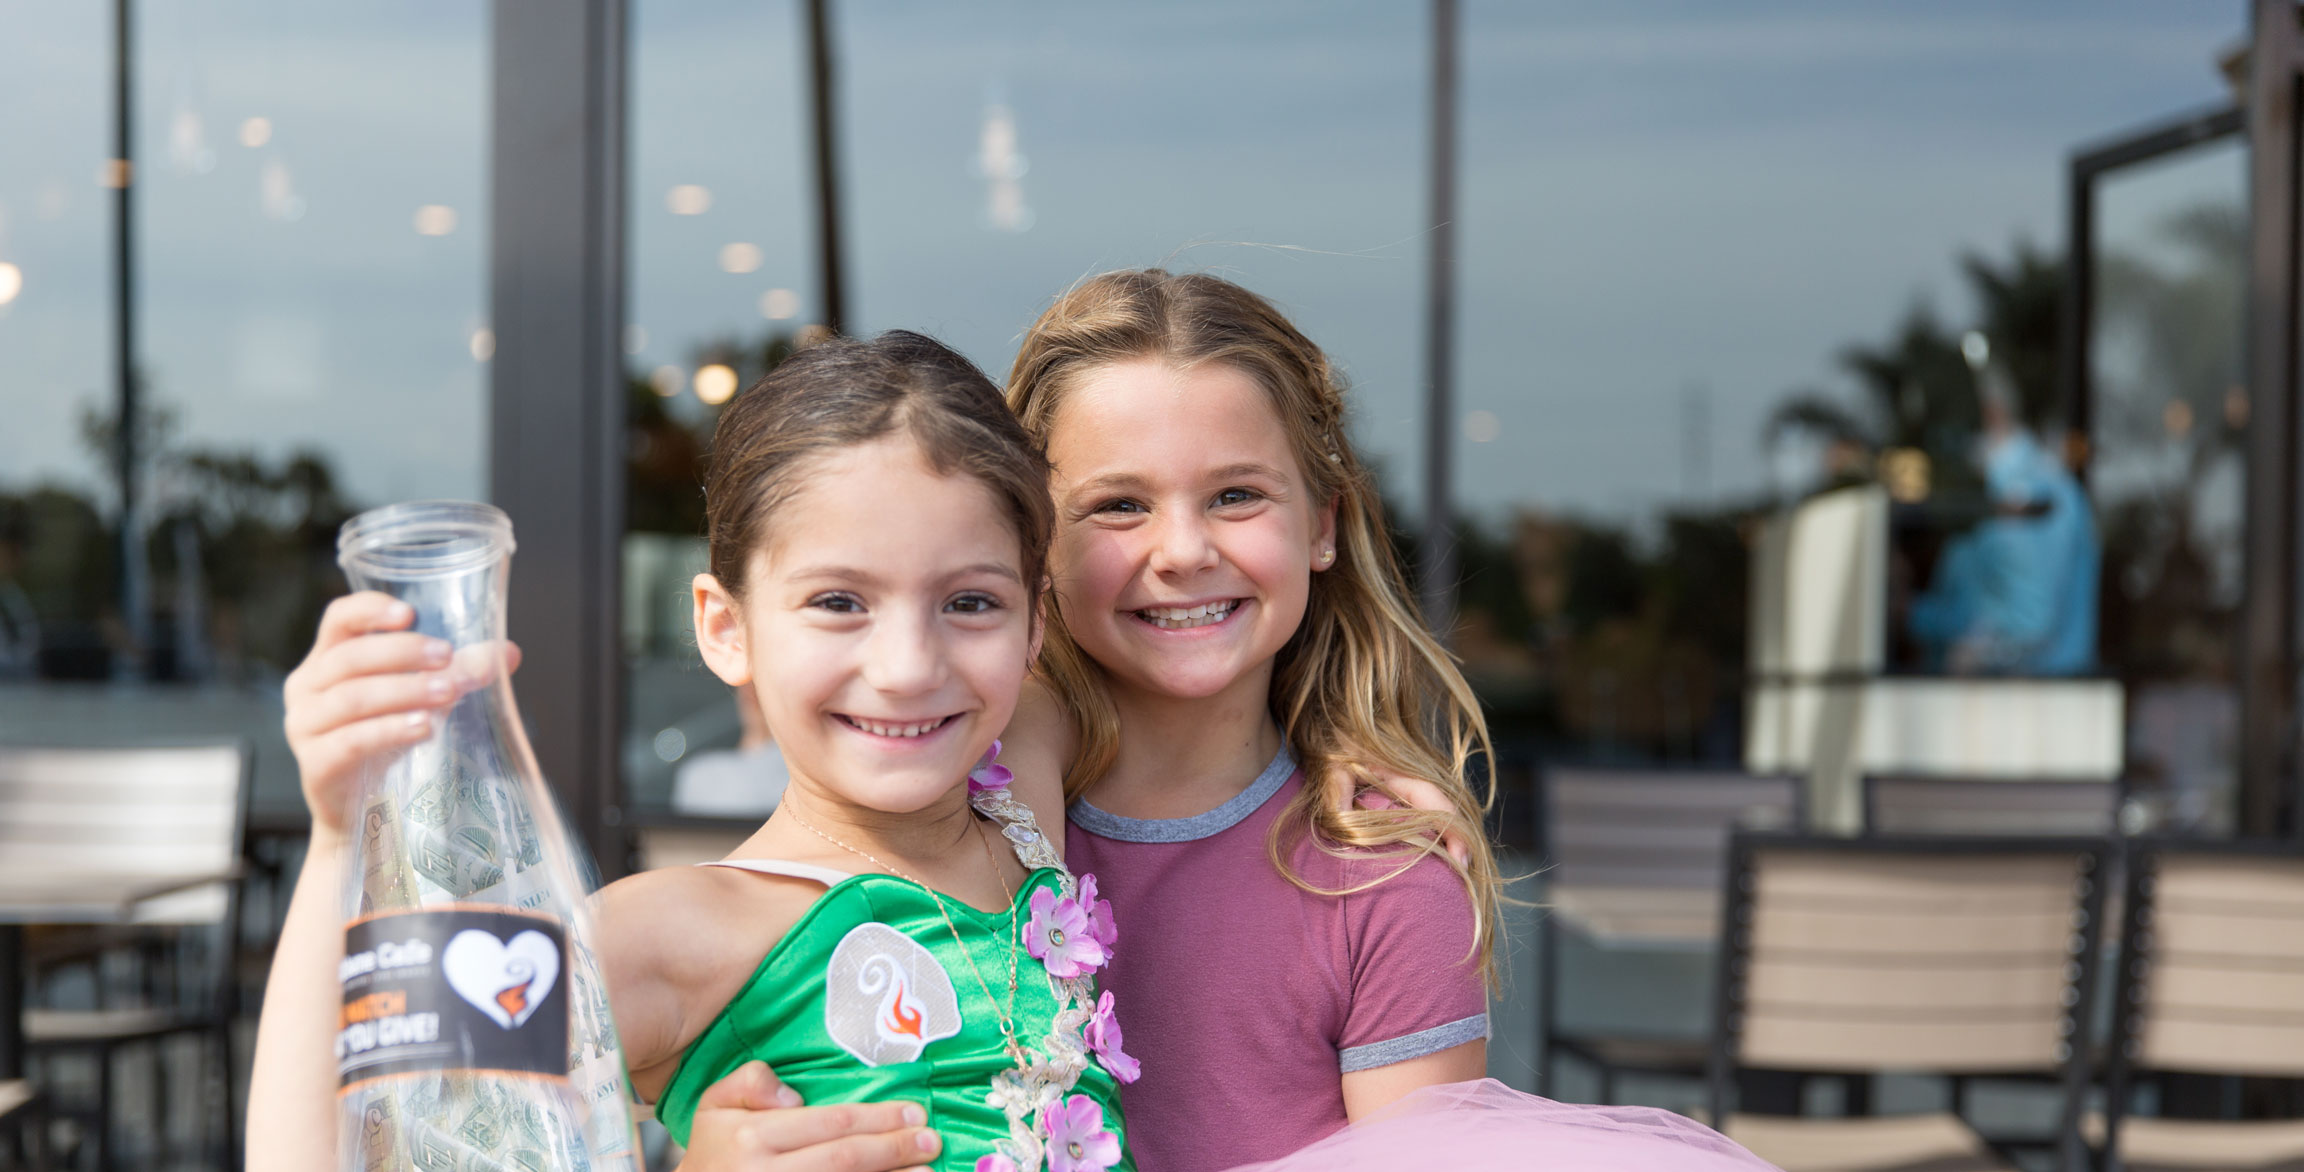 two little girls smiling holding fundraising jar in front of urbane cafe